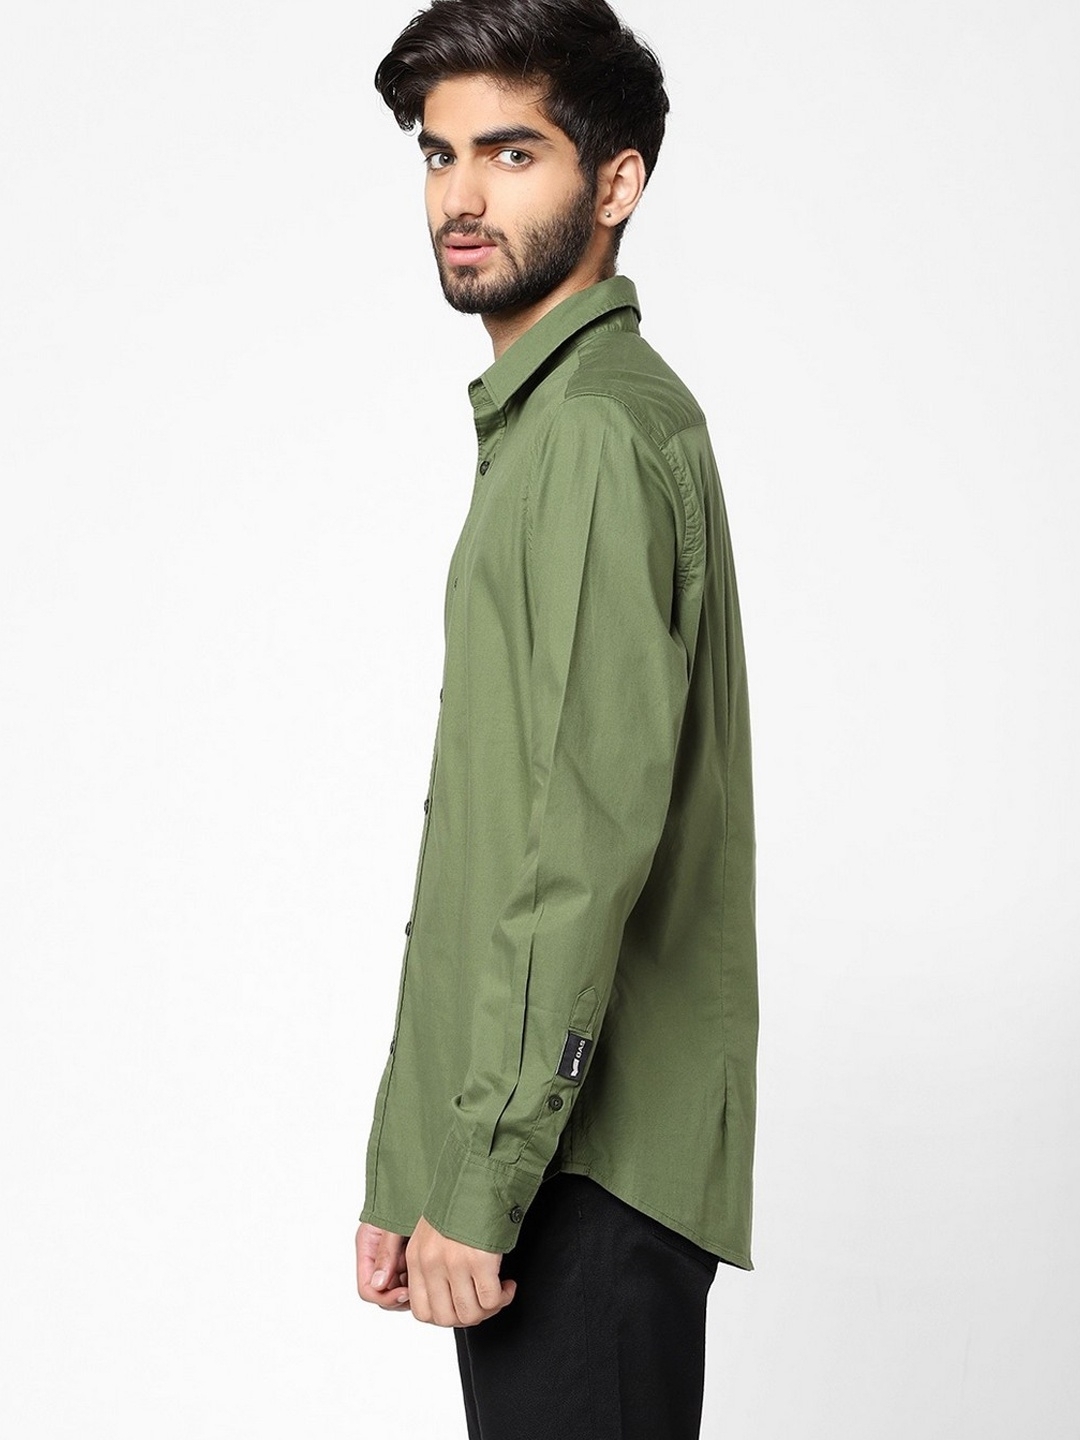 Andrew Slim Fit Shirt with Spread Collar